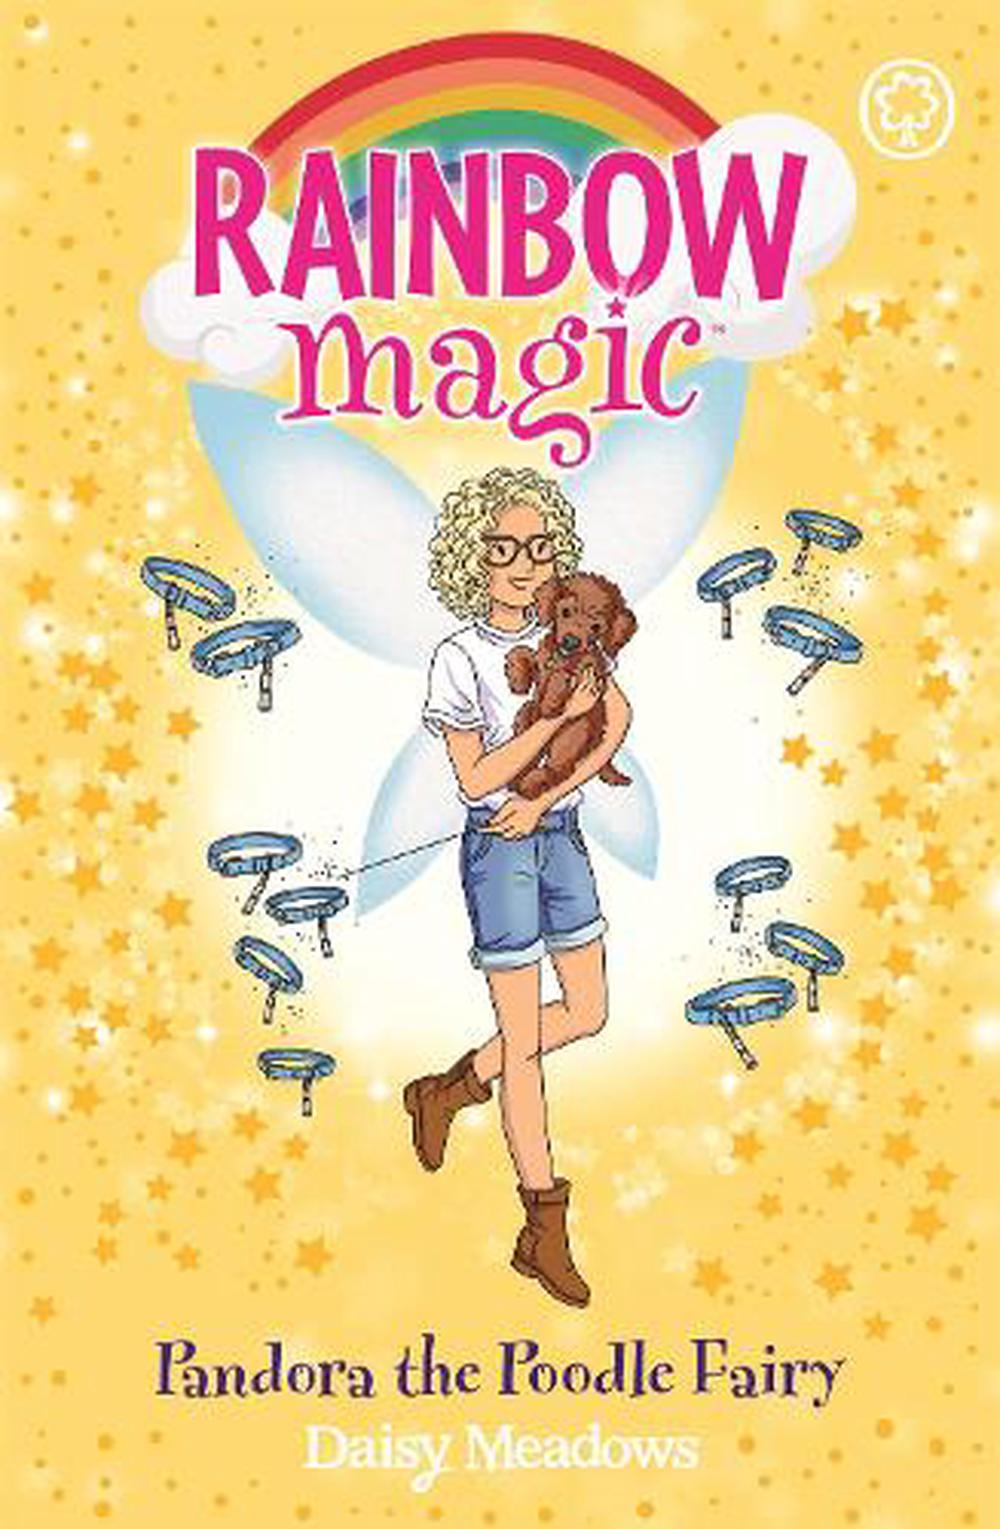 Pixie Magic: Emerald and the Friendship Bracelet by Daisy Meadows